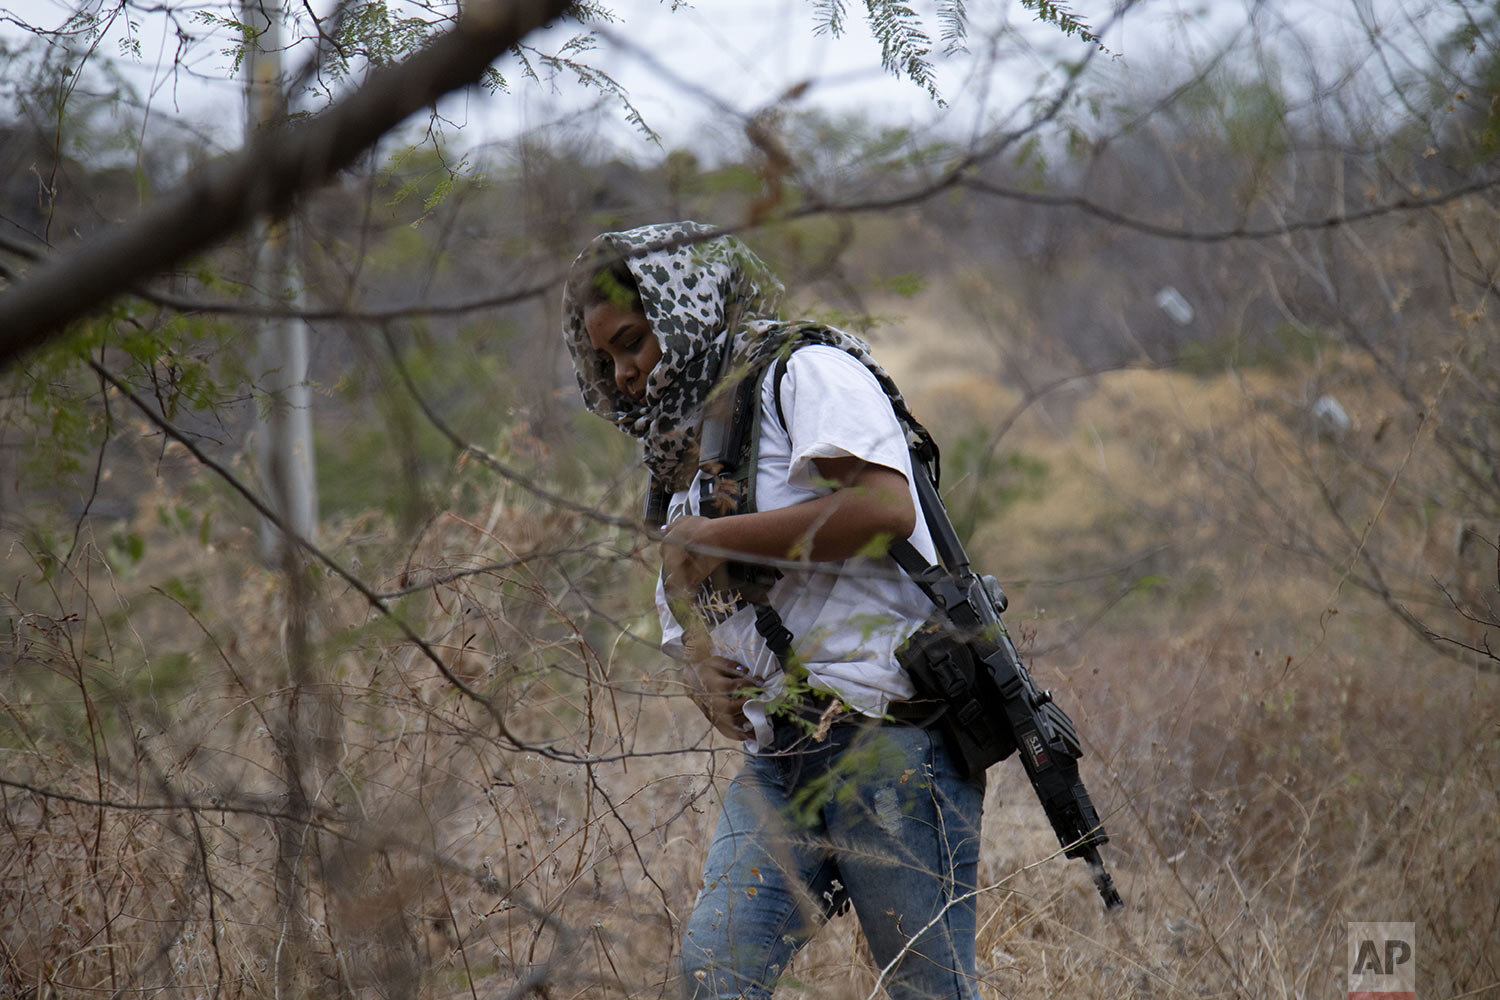  An armed woman who goes by the nickname "La Chola," and is a member of a female-led, self-defense group, patrols the edge of her town of El Terrero, where it shares a border with the town of Aguililla, in Michoacan state, Mexico, Jan. 14, 2021. (AP 